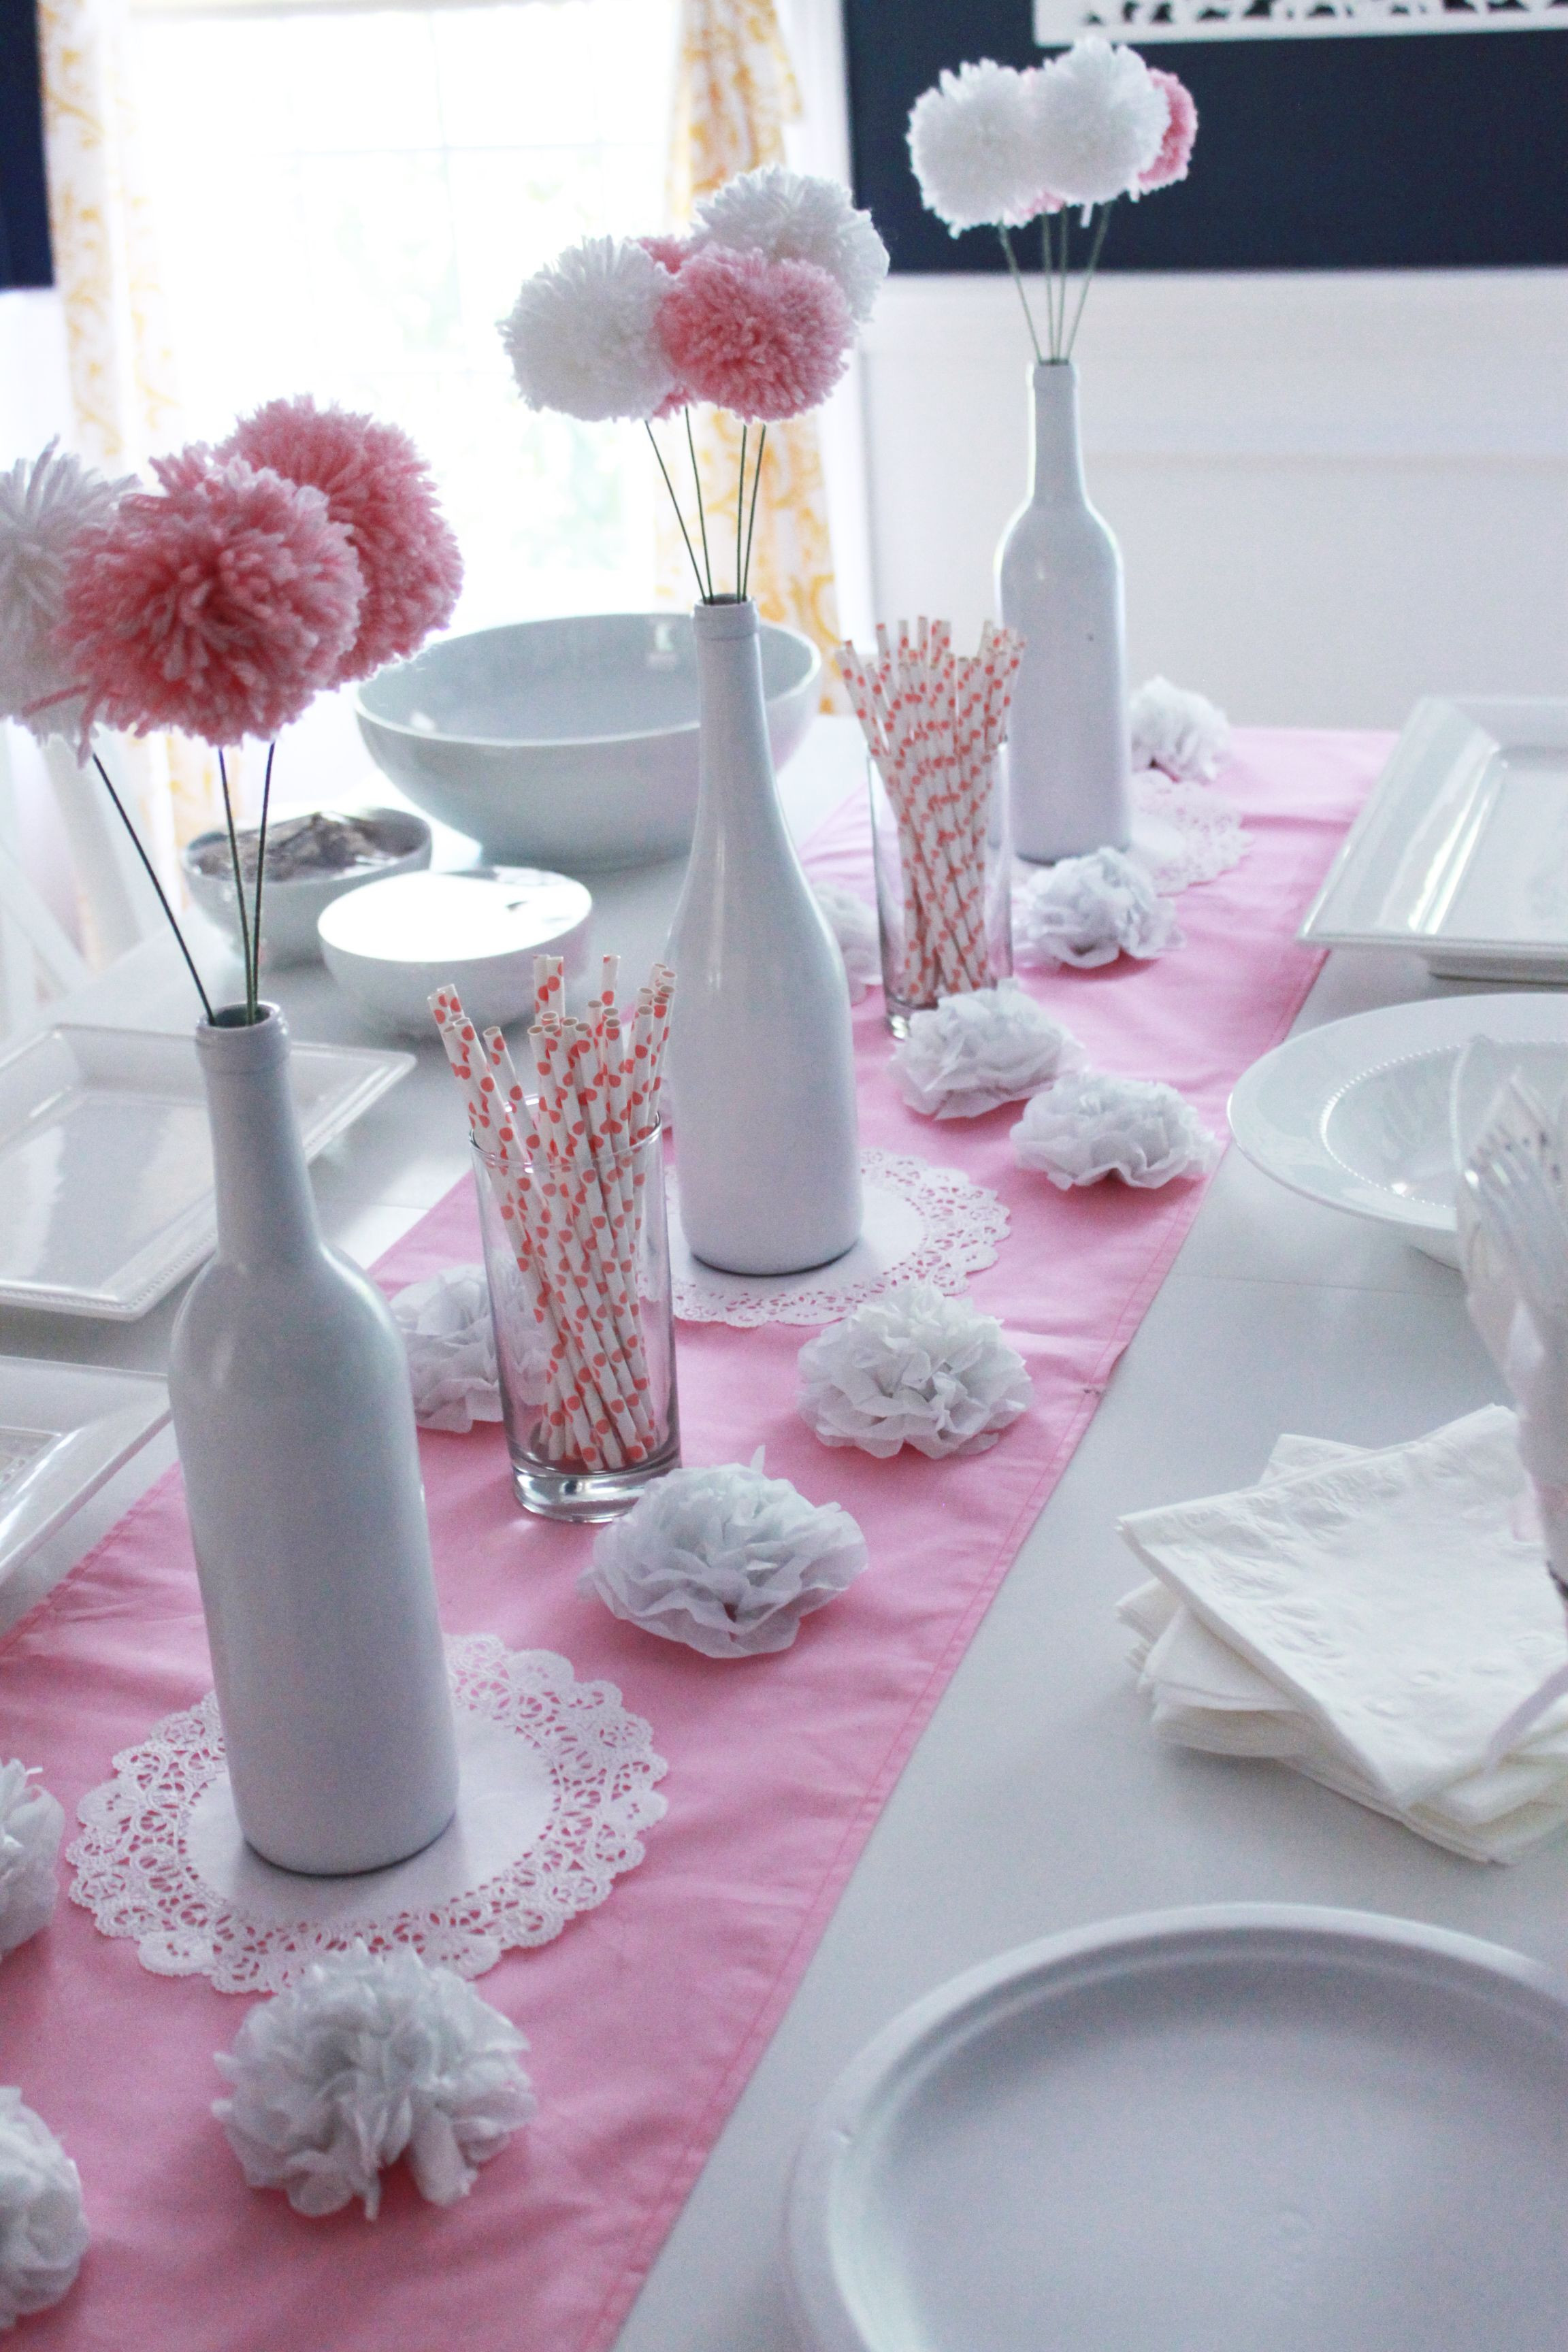 DIY Baby Shower Centerpieces For Girls
 DIY Baby Shower Ideas for Girls